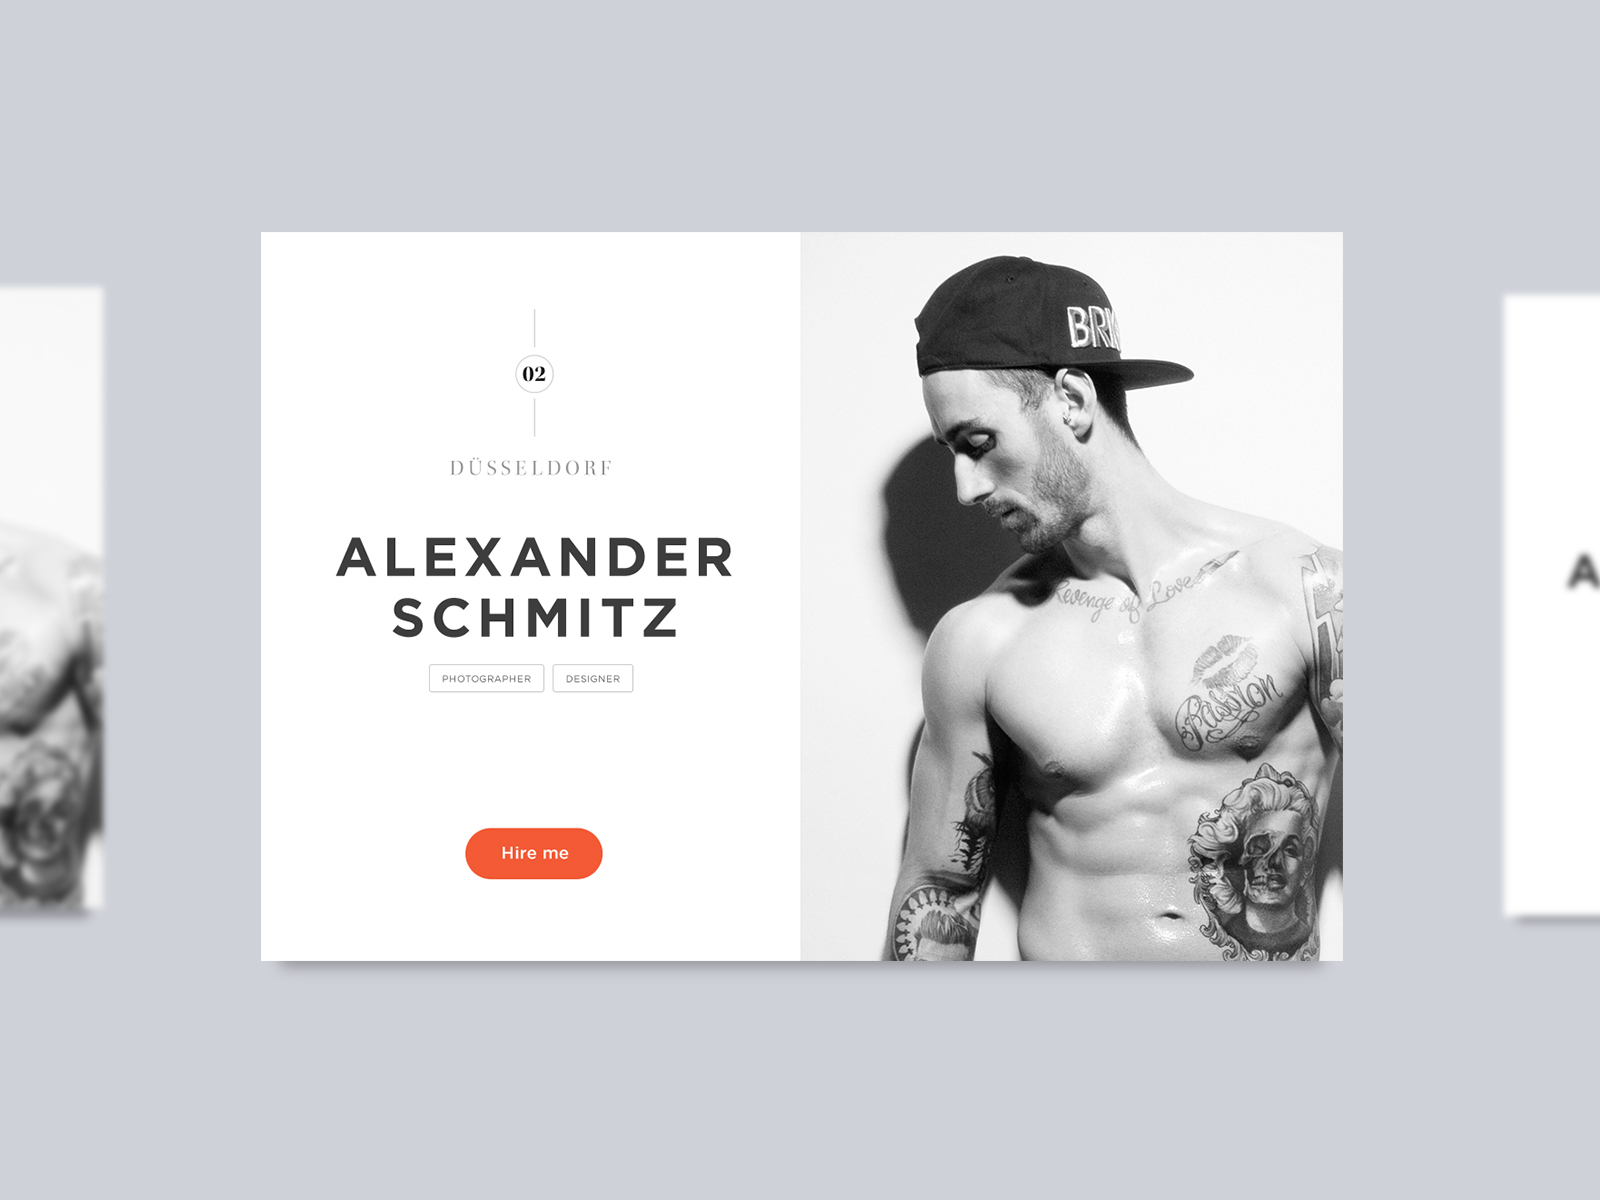 #006 - User Profile by Anna Wangler on Dribbble